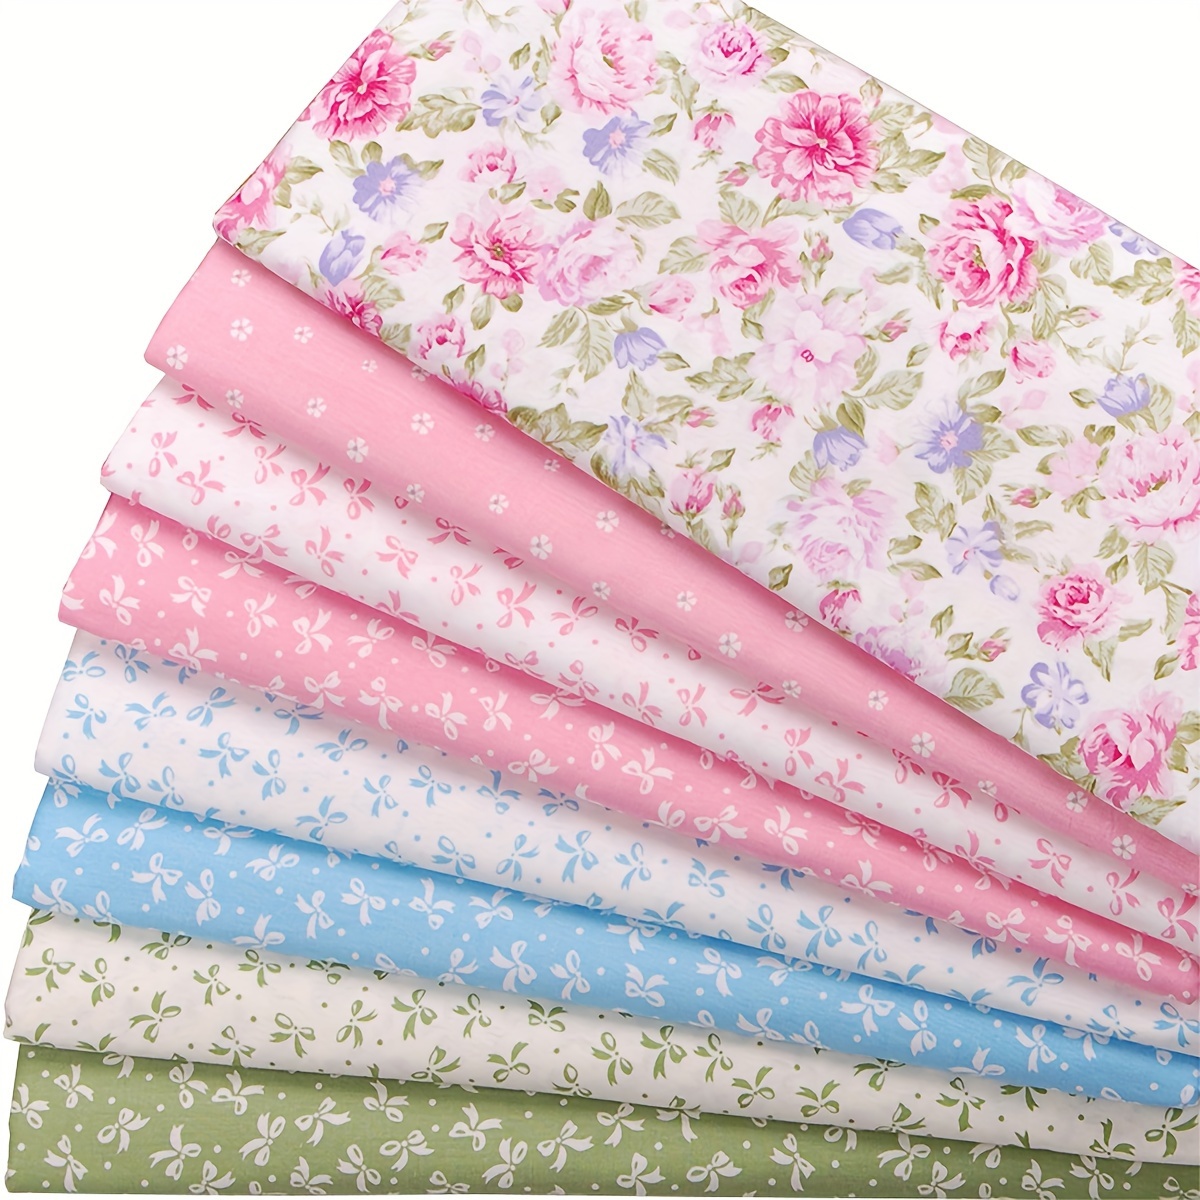 

8-pack Floral Cotton Fabric Squares, 18x22 Inches - Assorted Colors, Pre-cut Quilting & Patchwork Material Fabric For Quilting Quilting Fabric